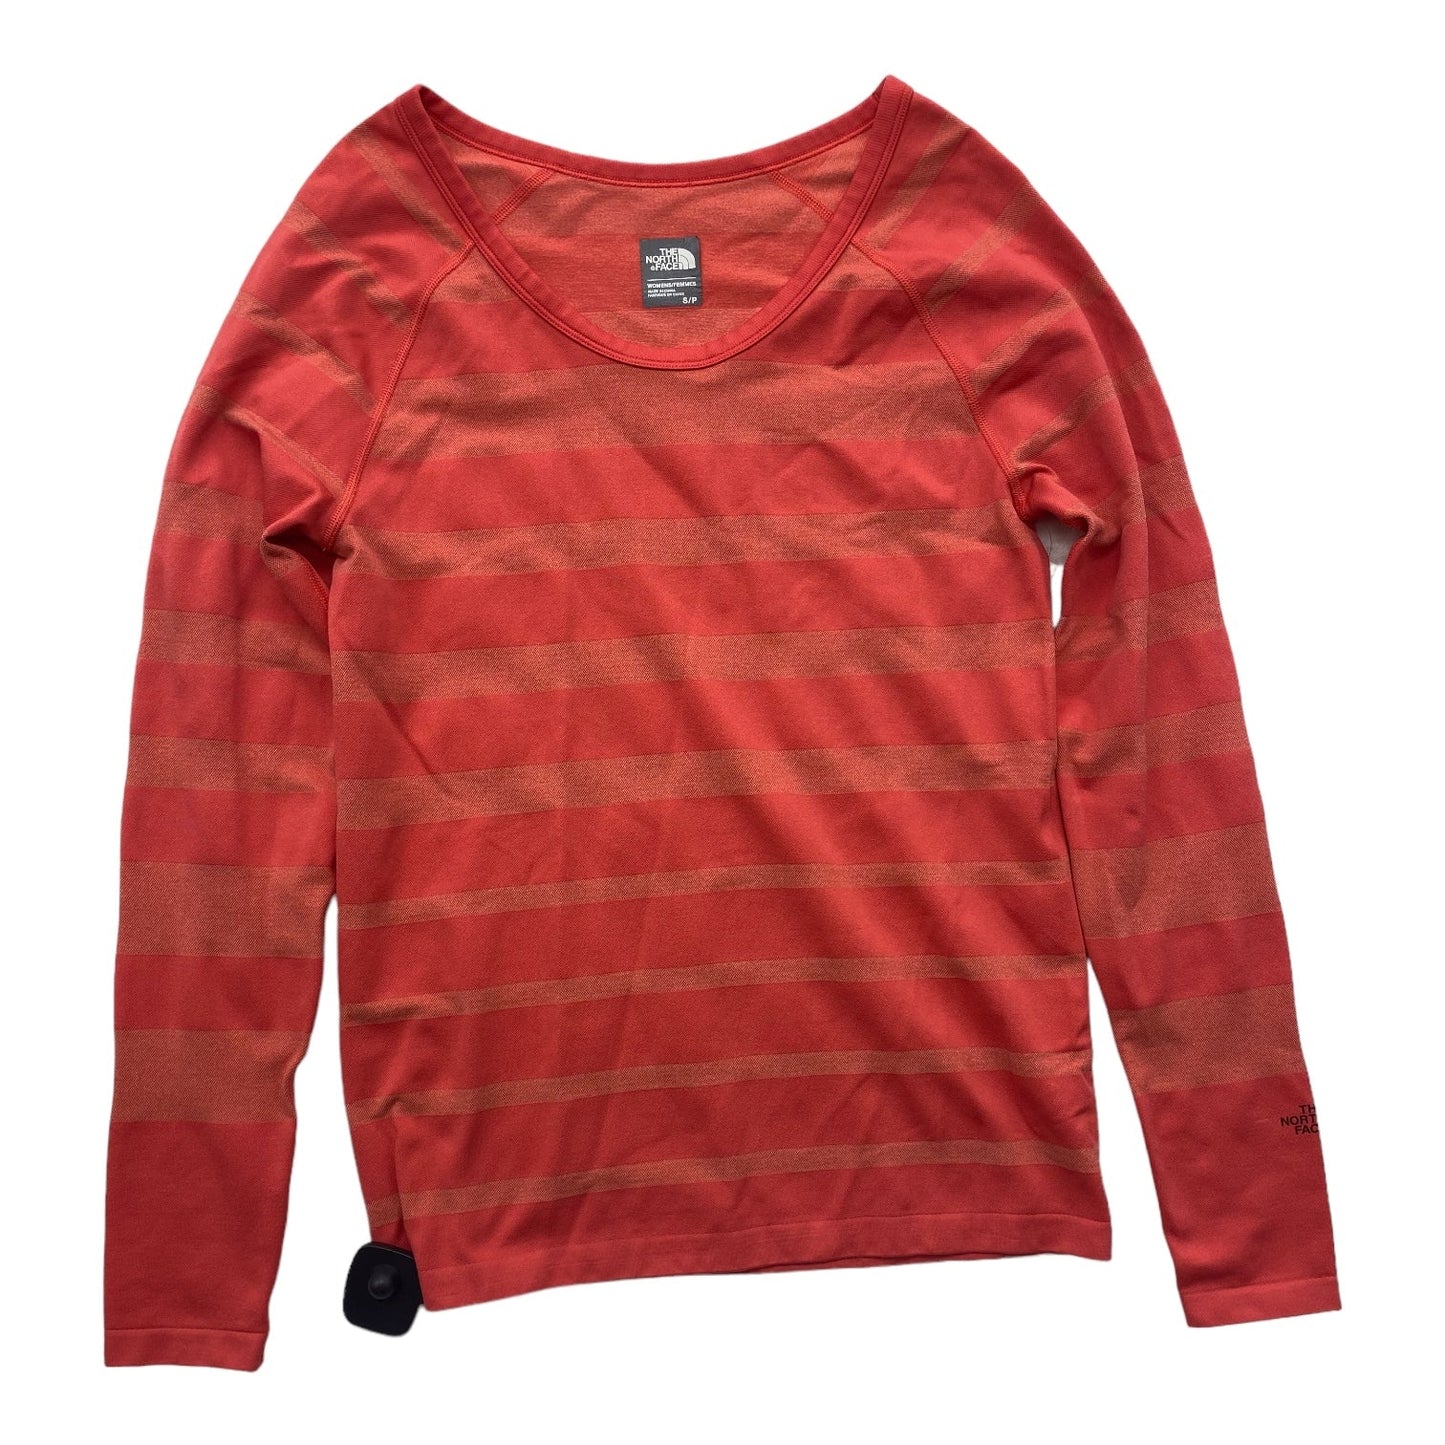 Coral Athletic Top Long Sleeve Crewneck The North Face, Size S